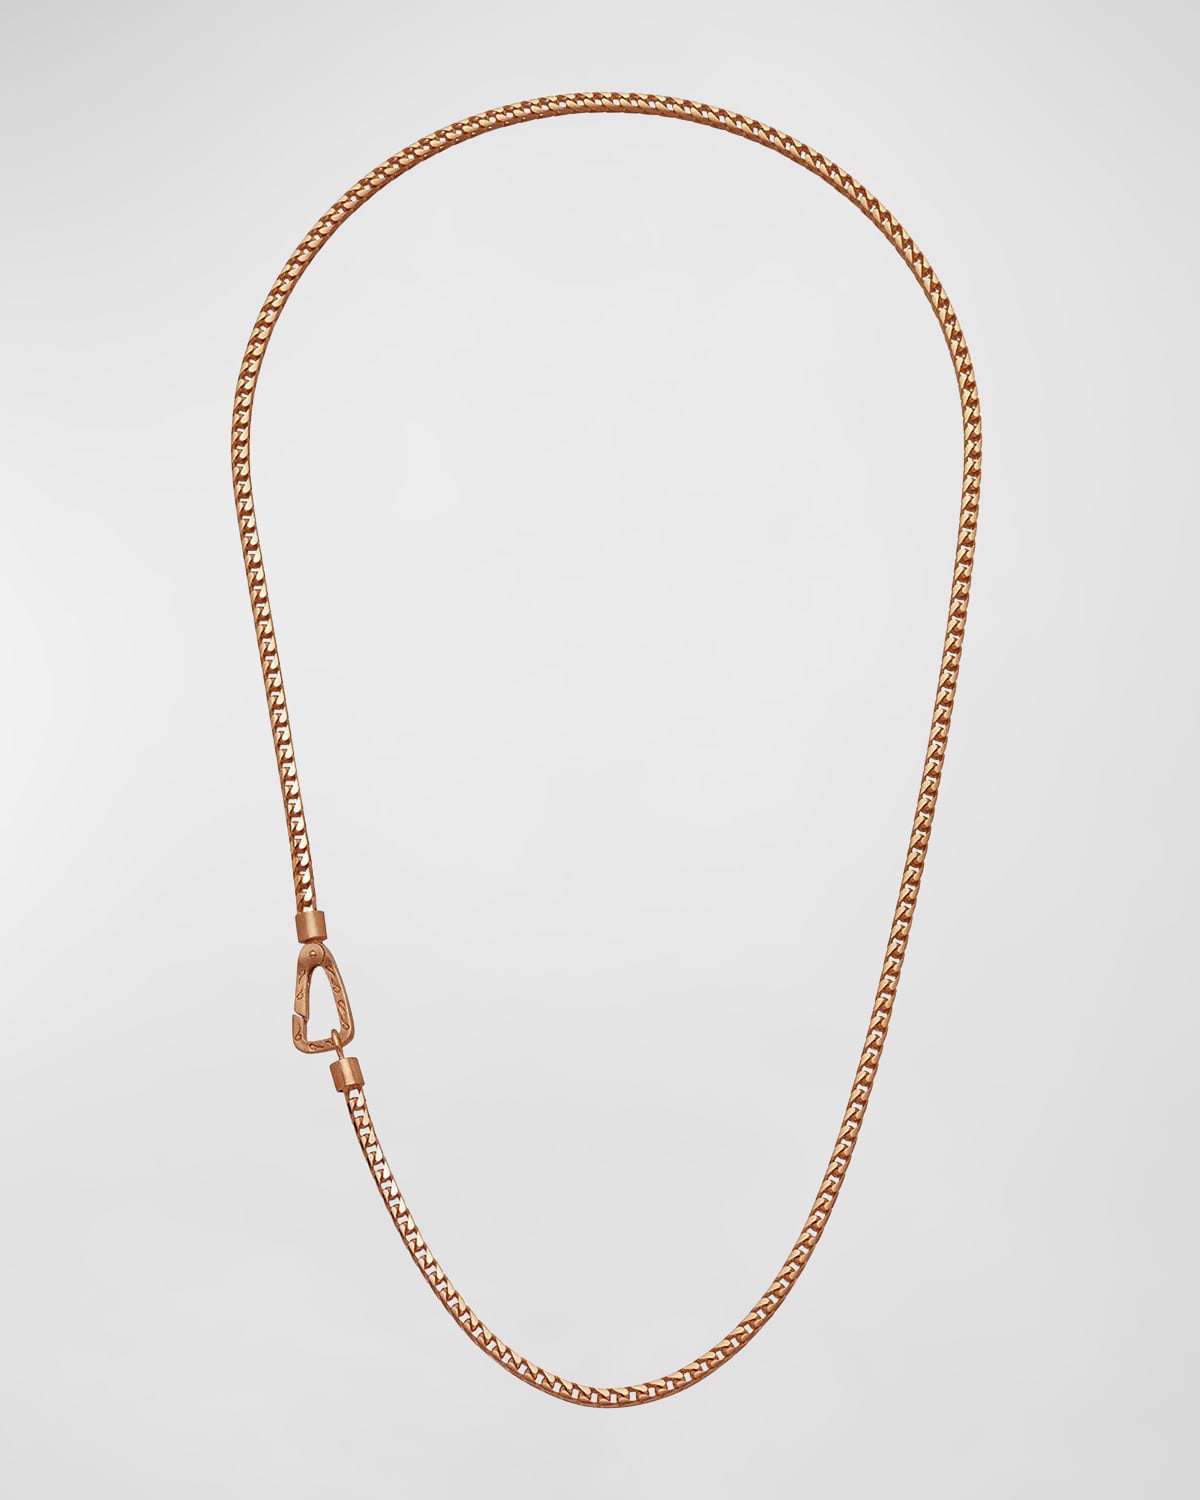 Men's Ulysses Franco Chain Necklace with Push Clasp in Gold, 52mm